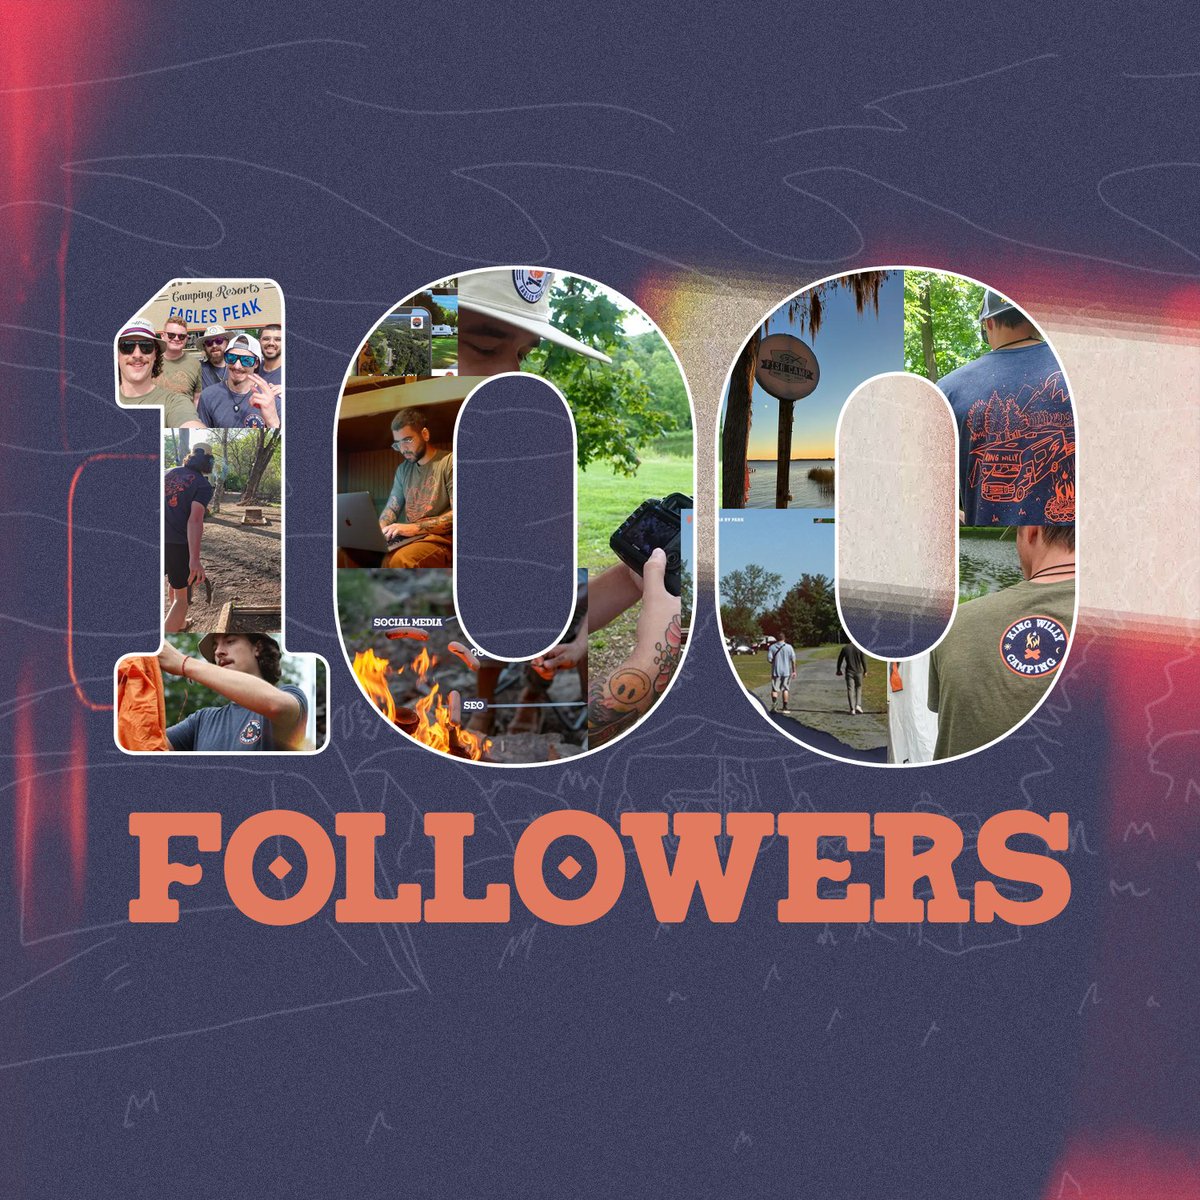 We've reached 100 followers! Thank you to everyone who has followed and joined the journey of King Willy Camping. We have plenty of more amazing projects coming, so stay tuned 🏕️ 
#Kingwillycamping #camping #campgroundmarketing #custommarketing #googleads #100followers #milestone